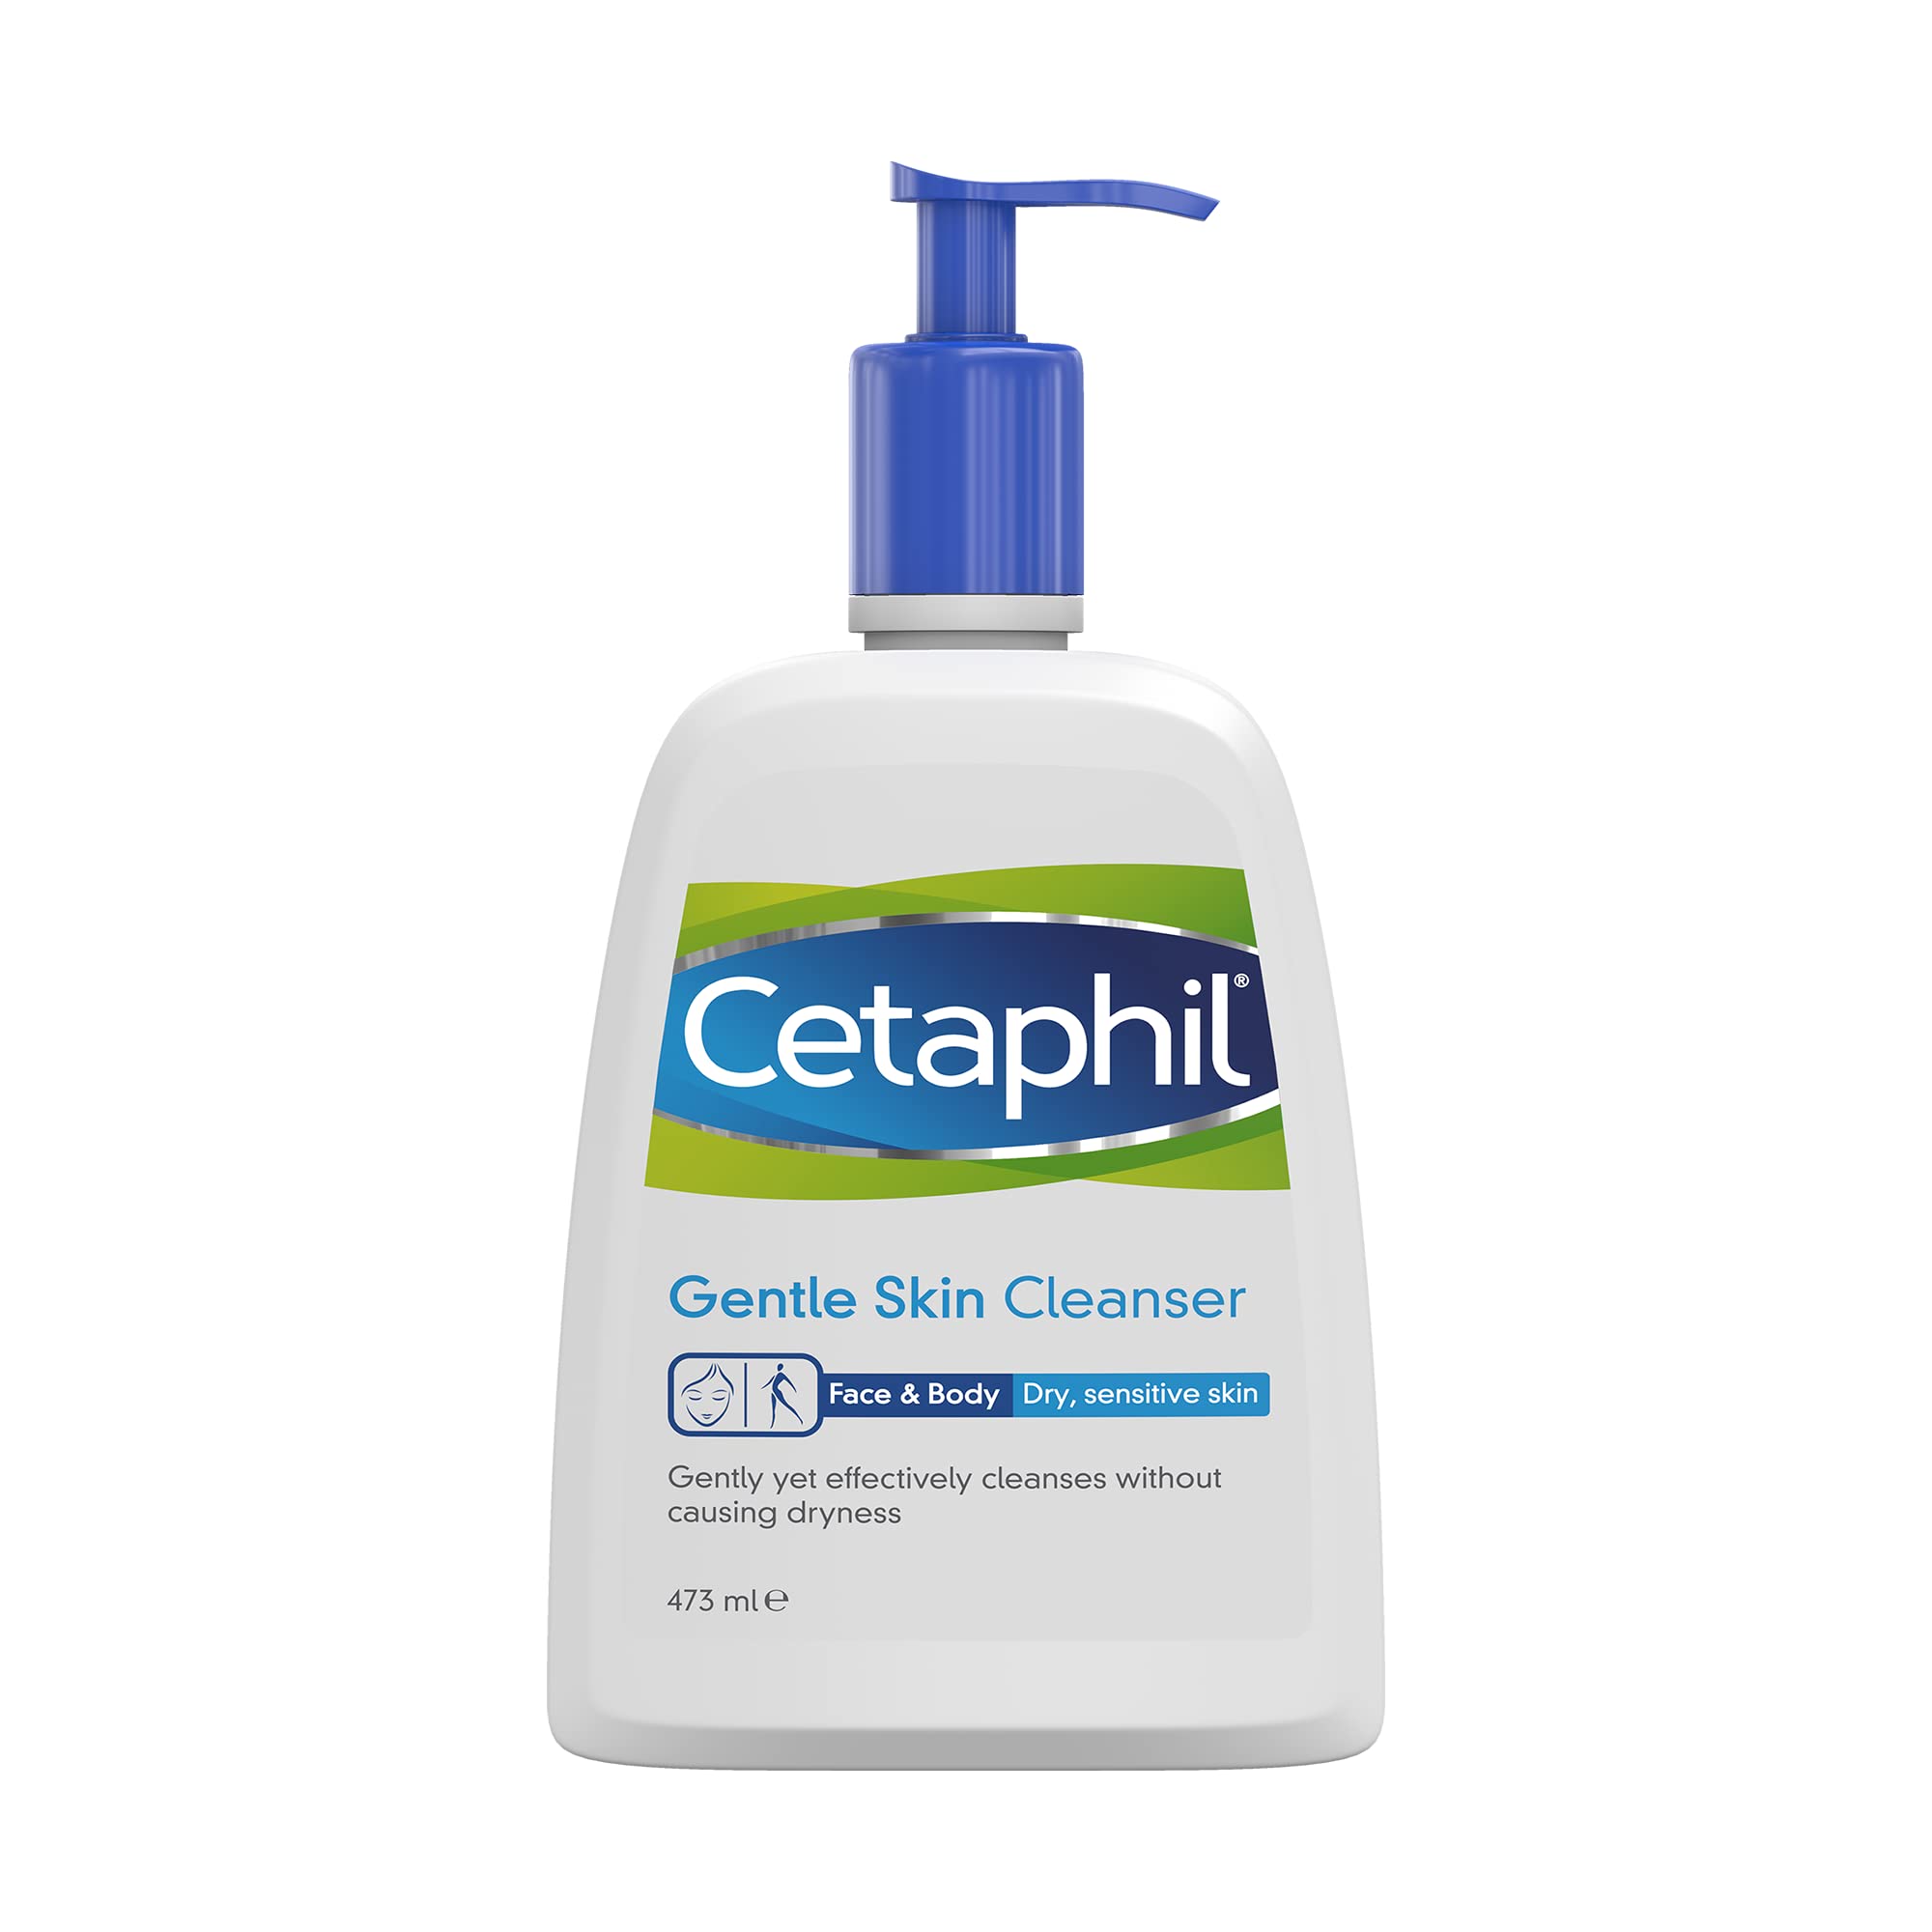 Cetaphil Gentle Skin Cleanser Face and Body Wash 1x 473 ml, Skin Care, Hydrating for Dry and Sensitive Skin, Non-comedogenic, Dermatologist recommended